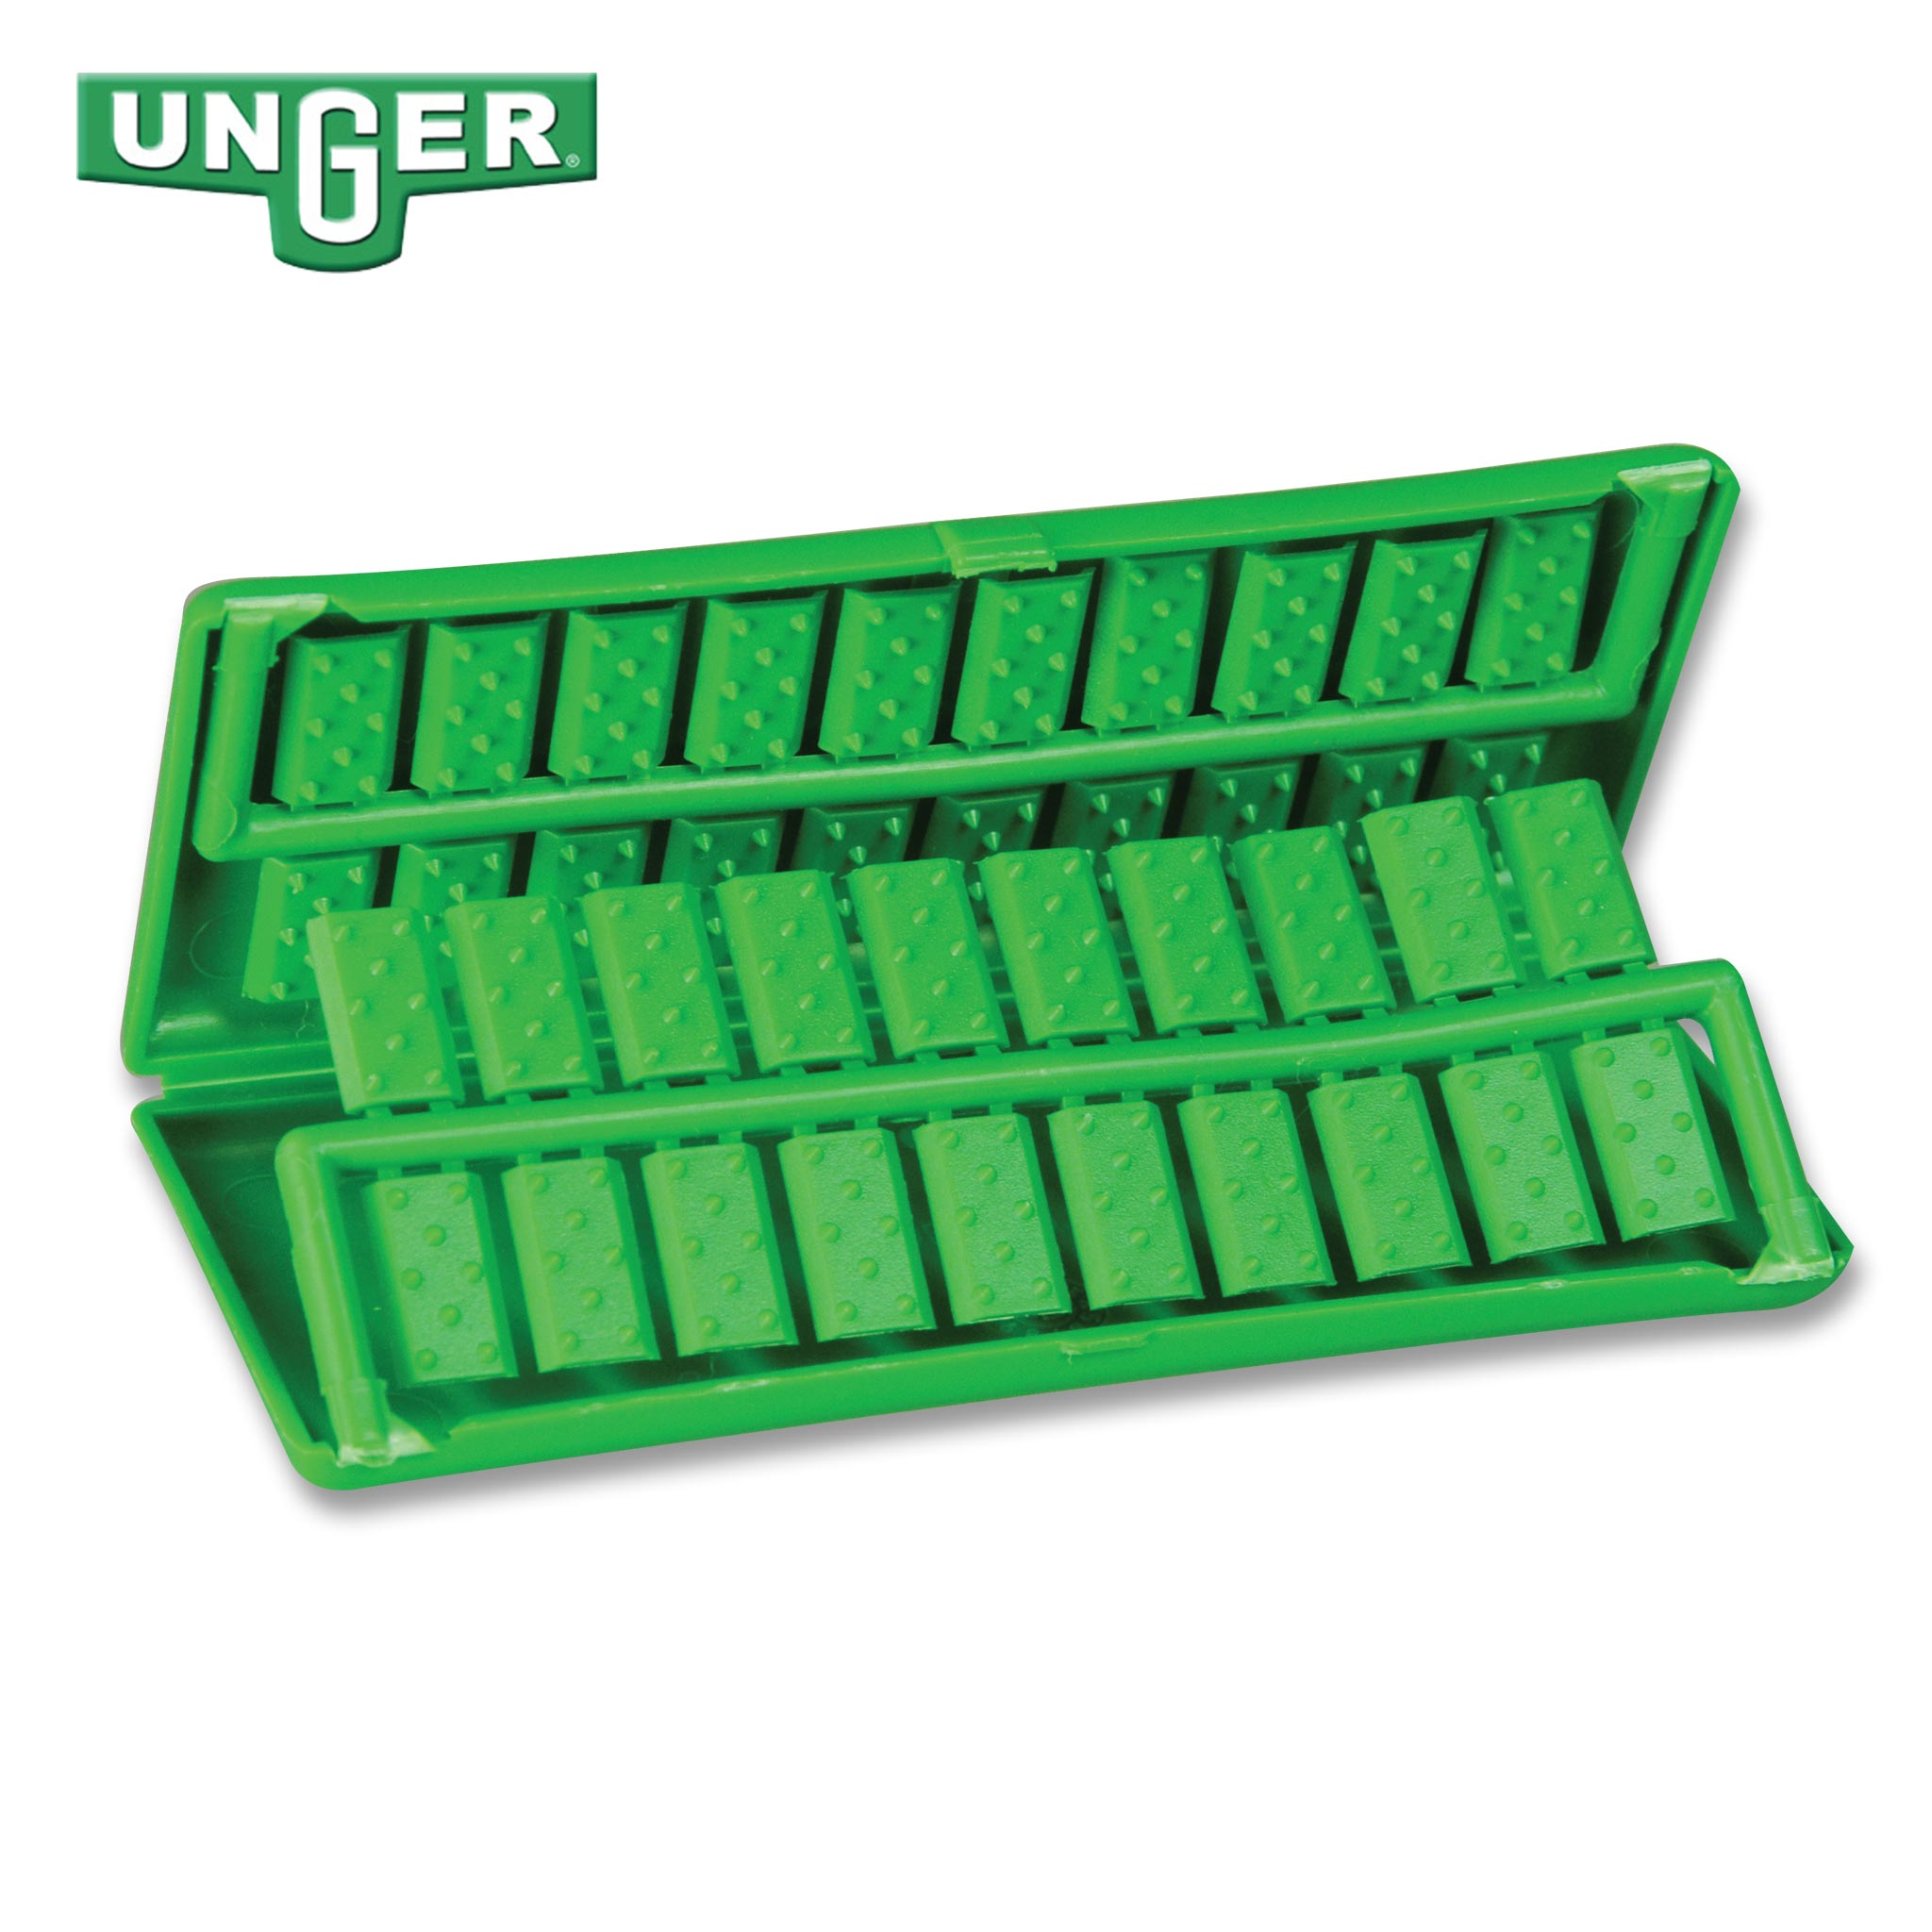 Unger Plasticlips - Channel Clips